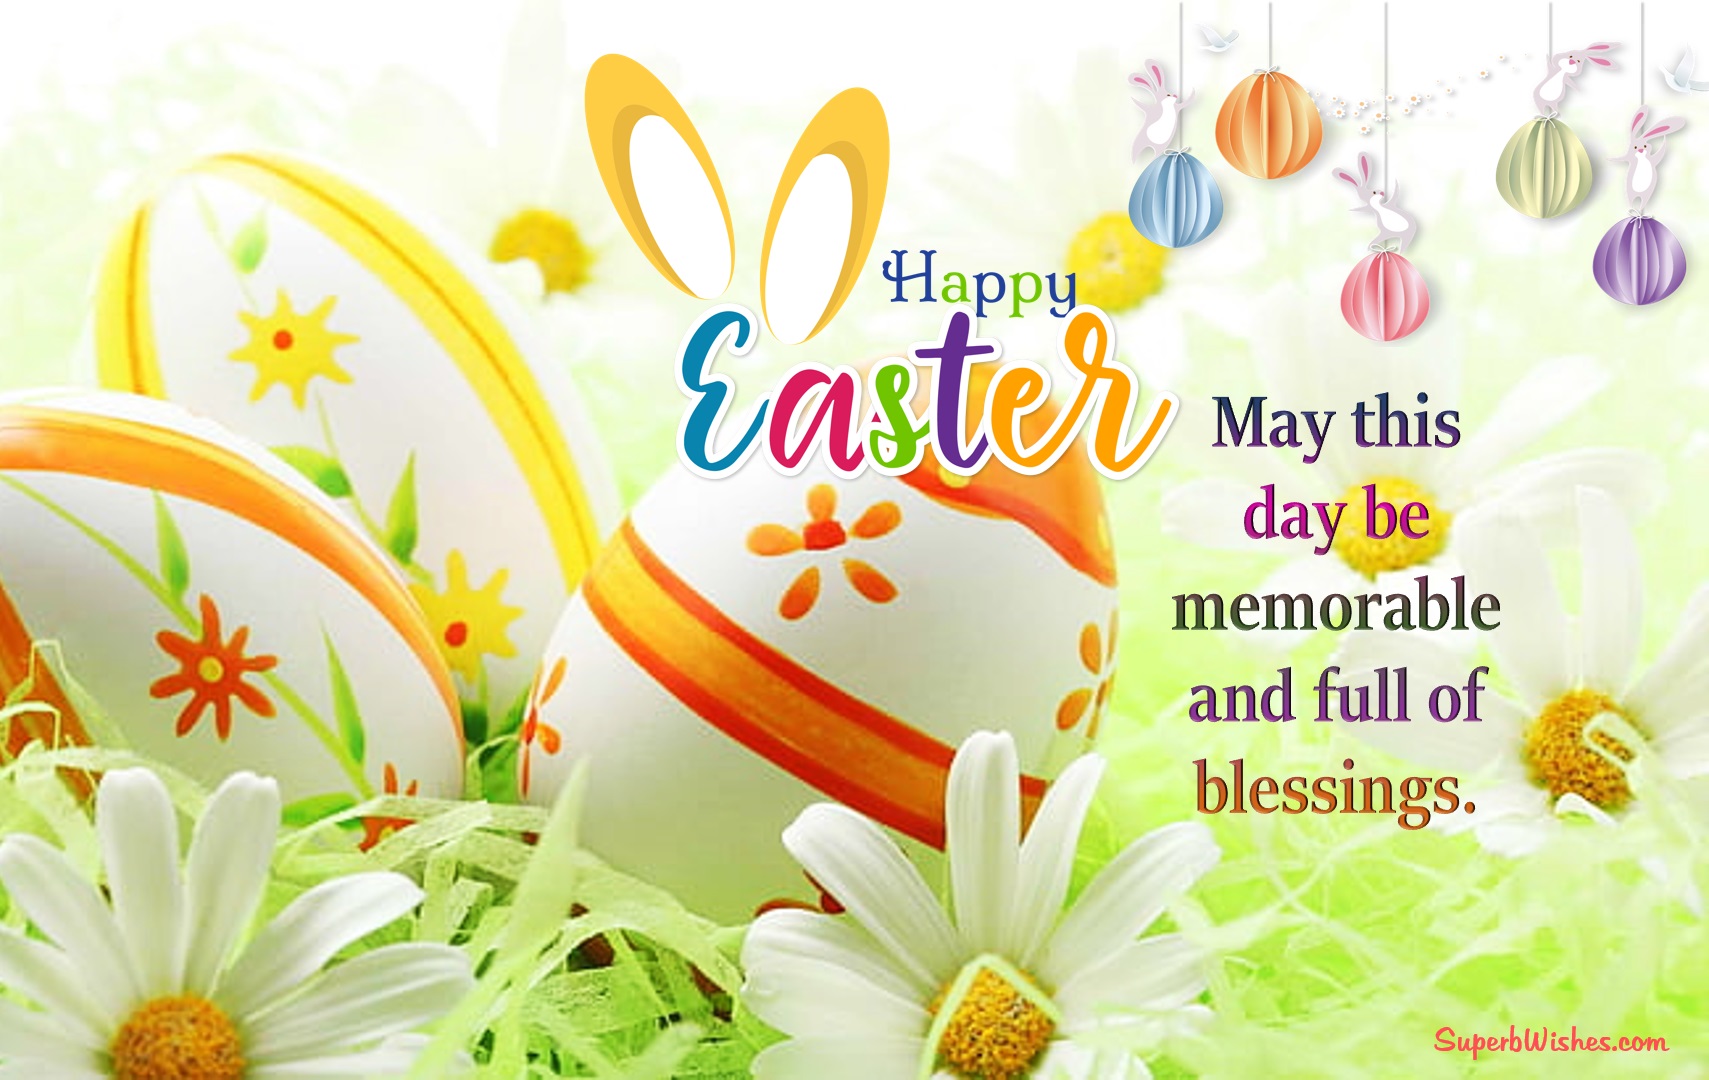 Easter Messages With Images by SuperbWishes